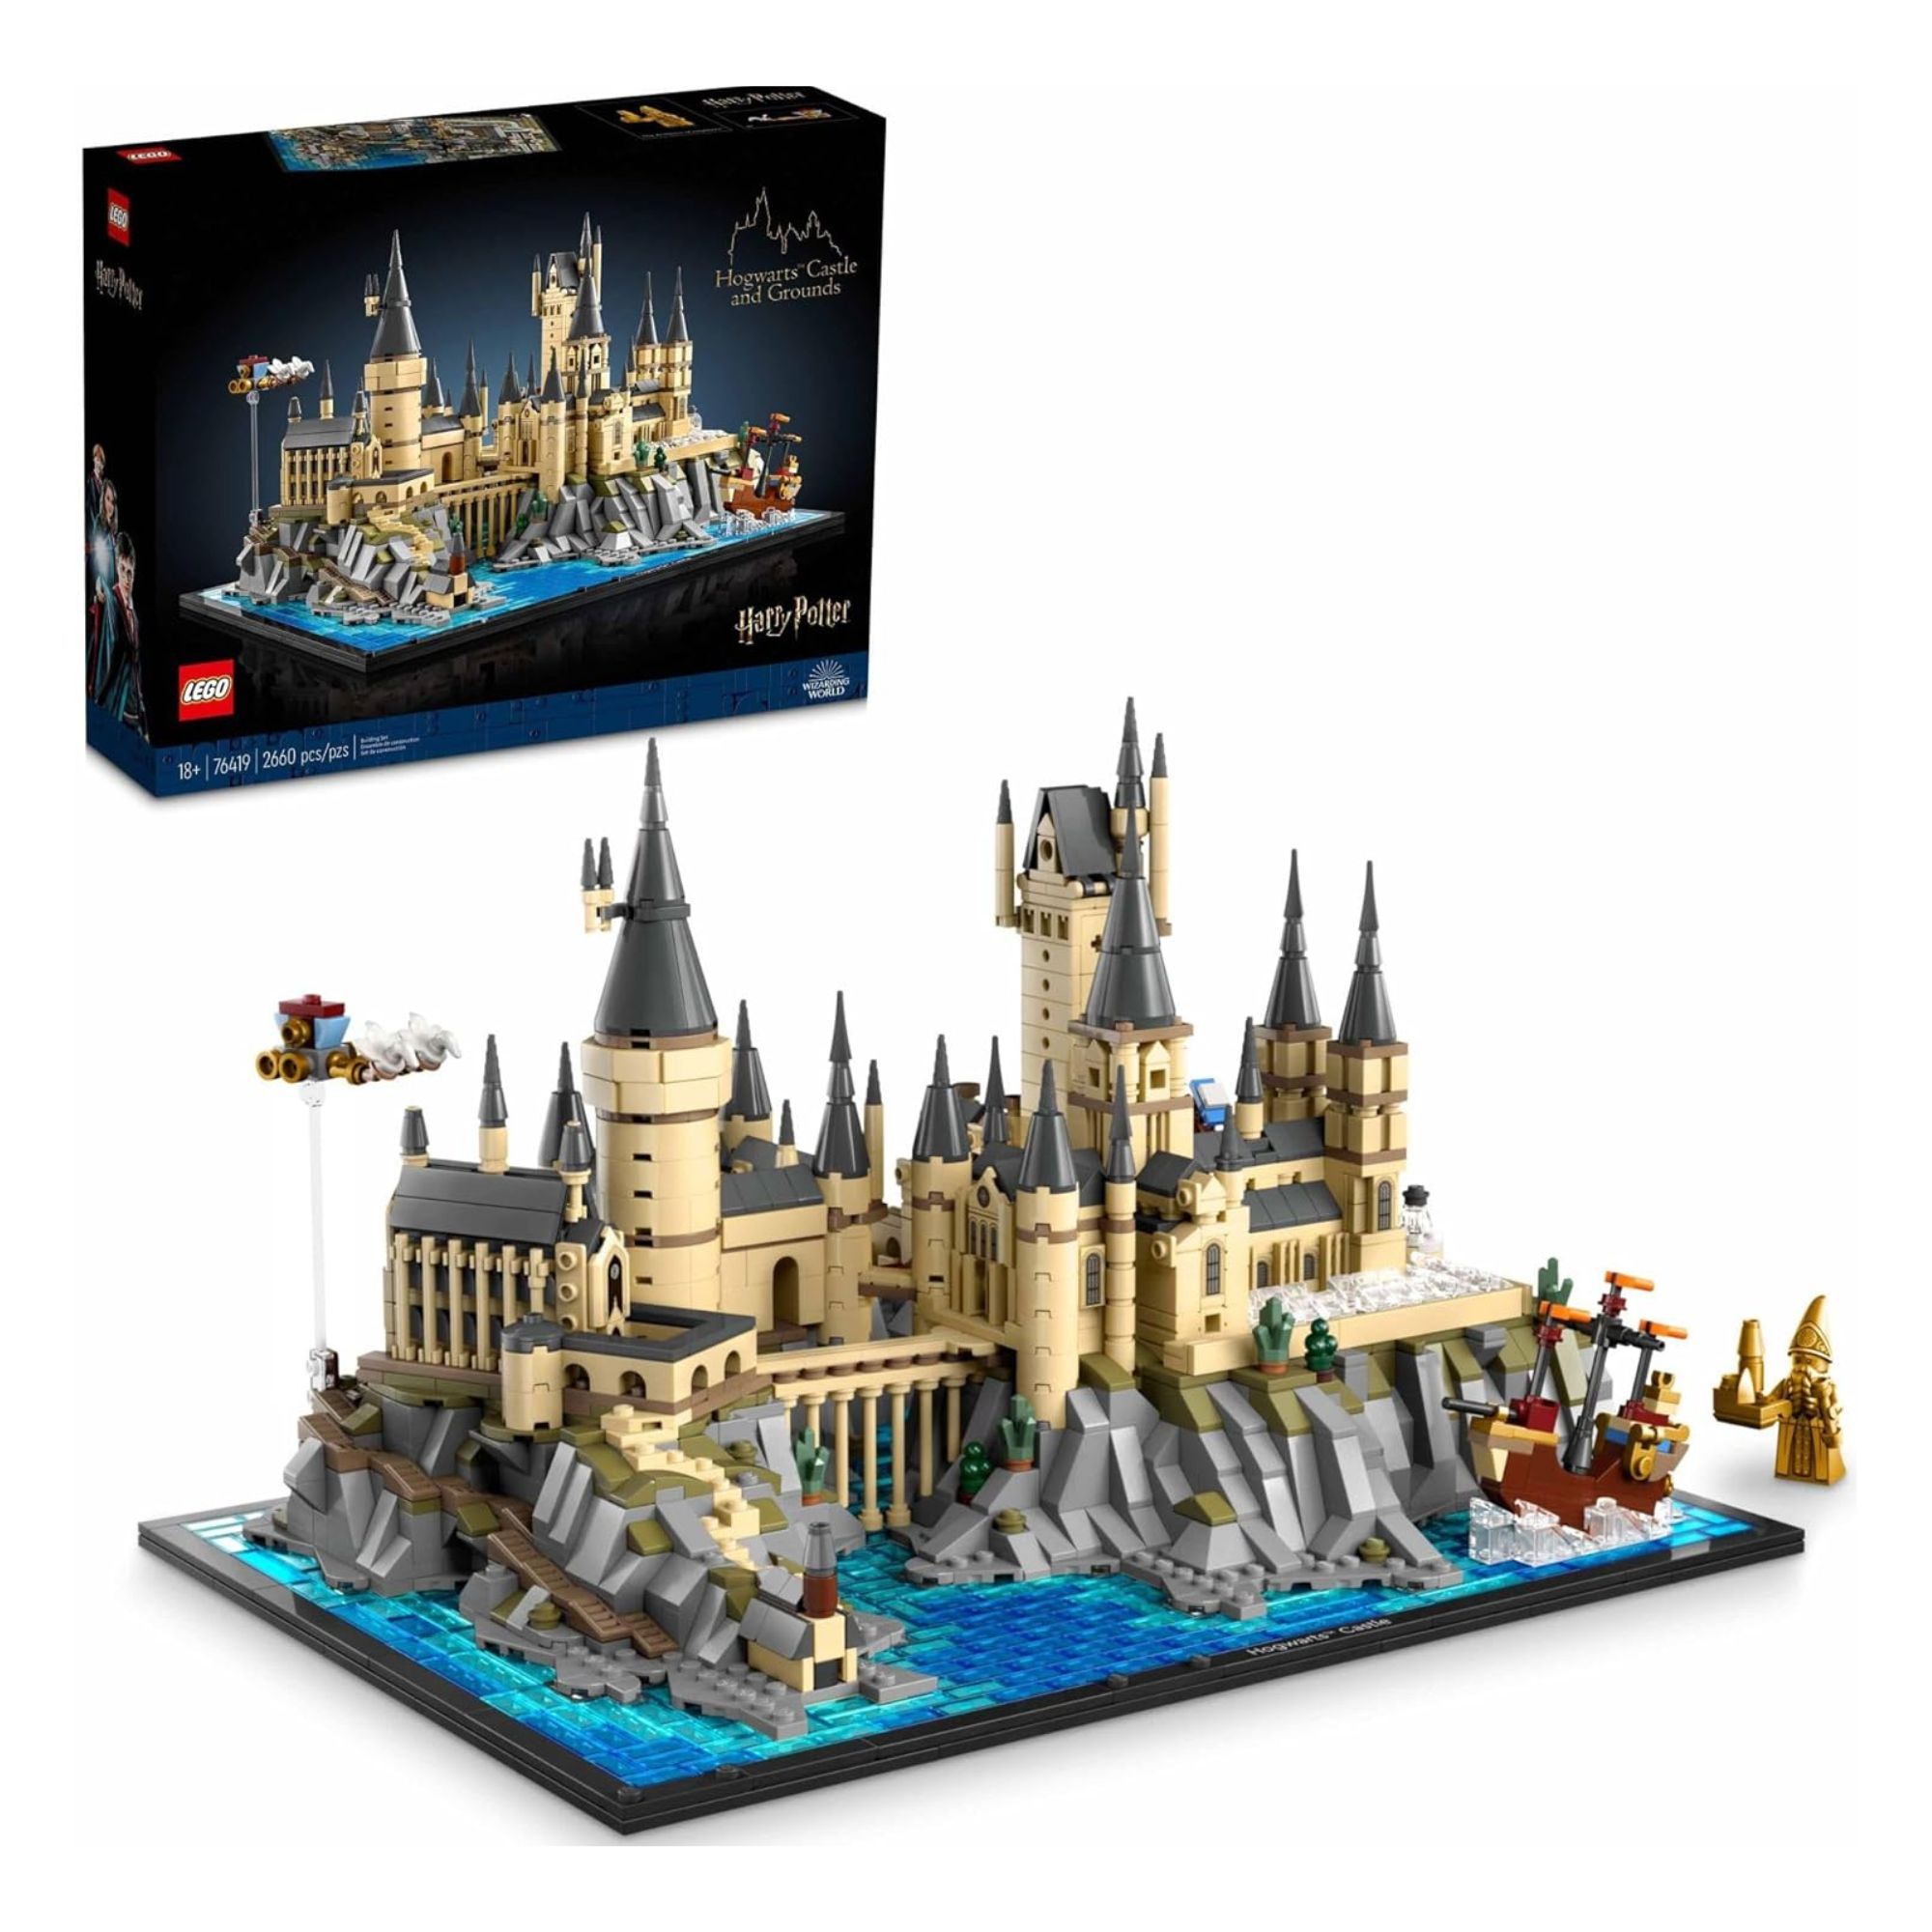 Product still of the Harry Potter LEGO Hogwarts Castle & Grounds on a white background